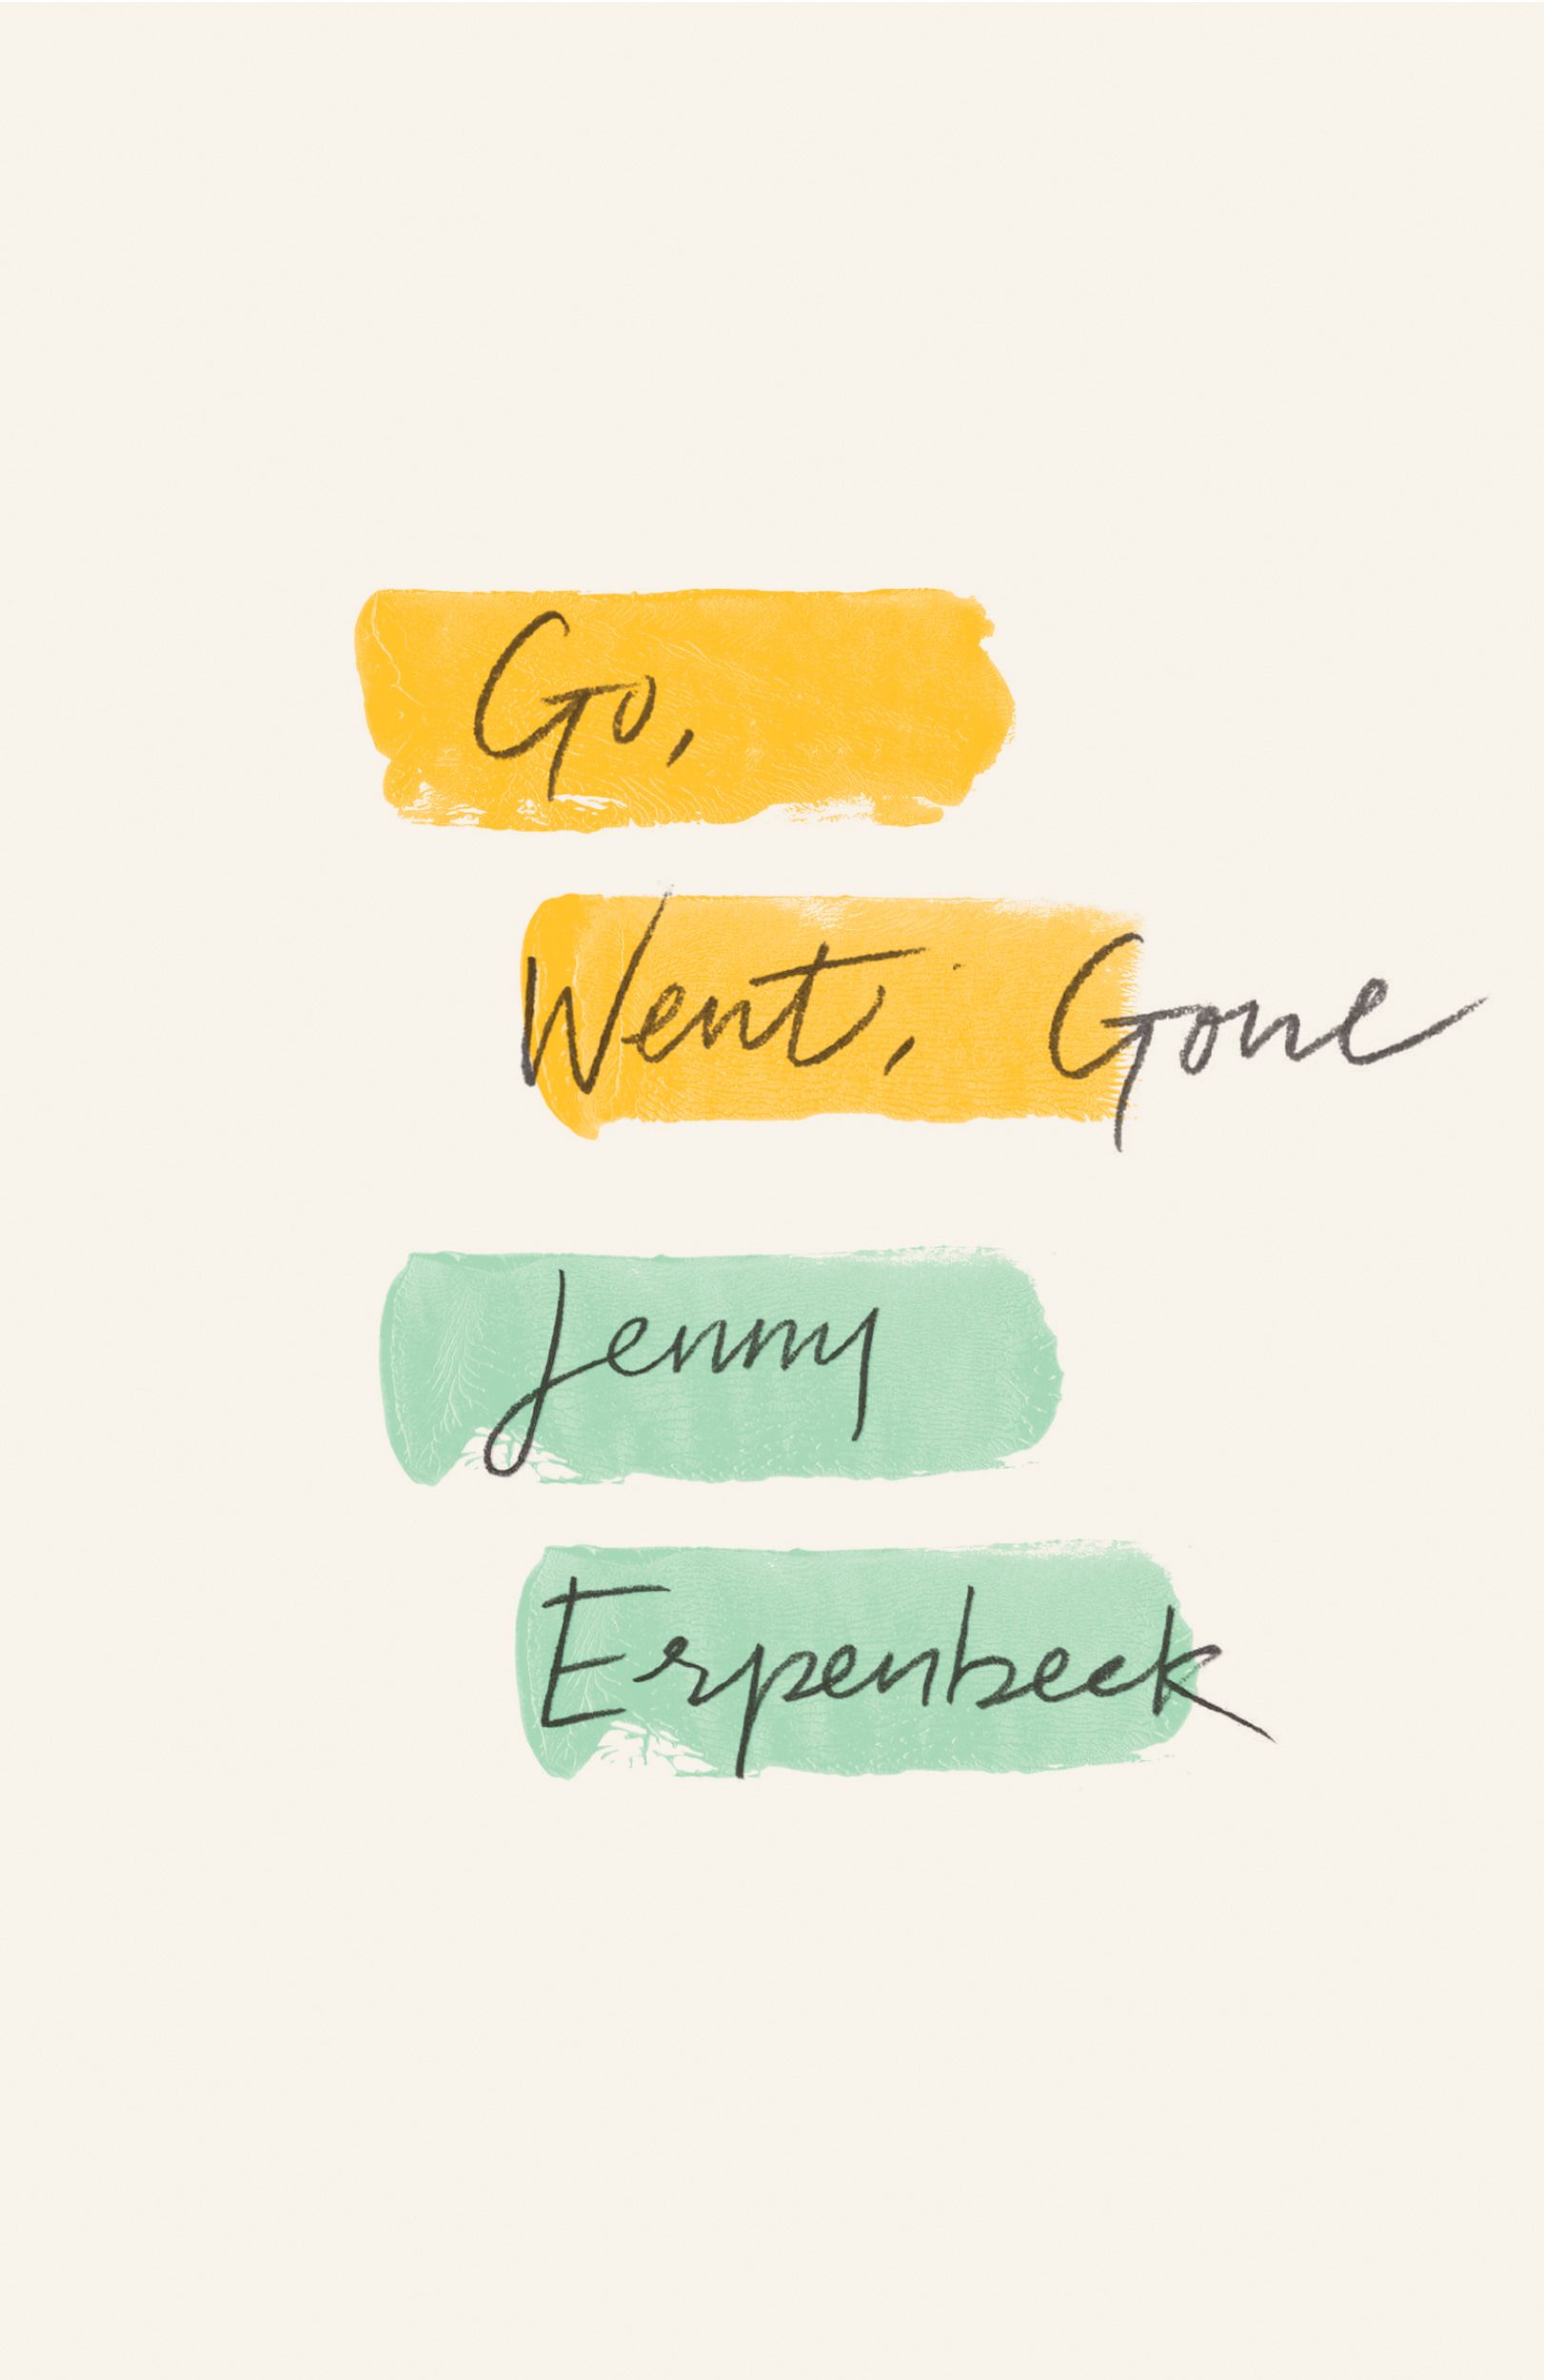 Go, Went, Gone by Jenny Erpenbeck